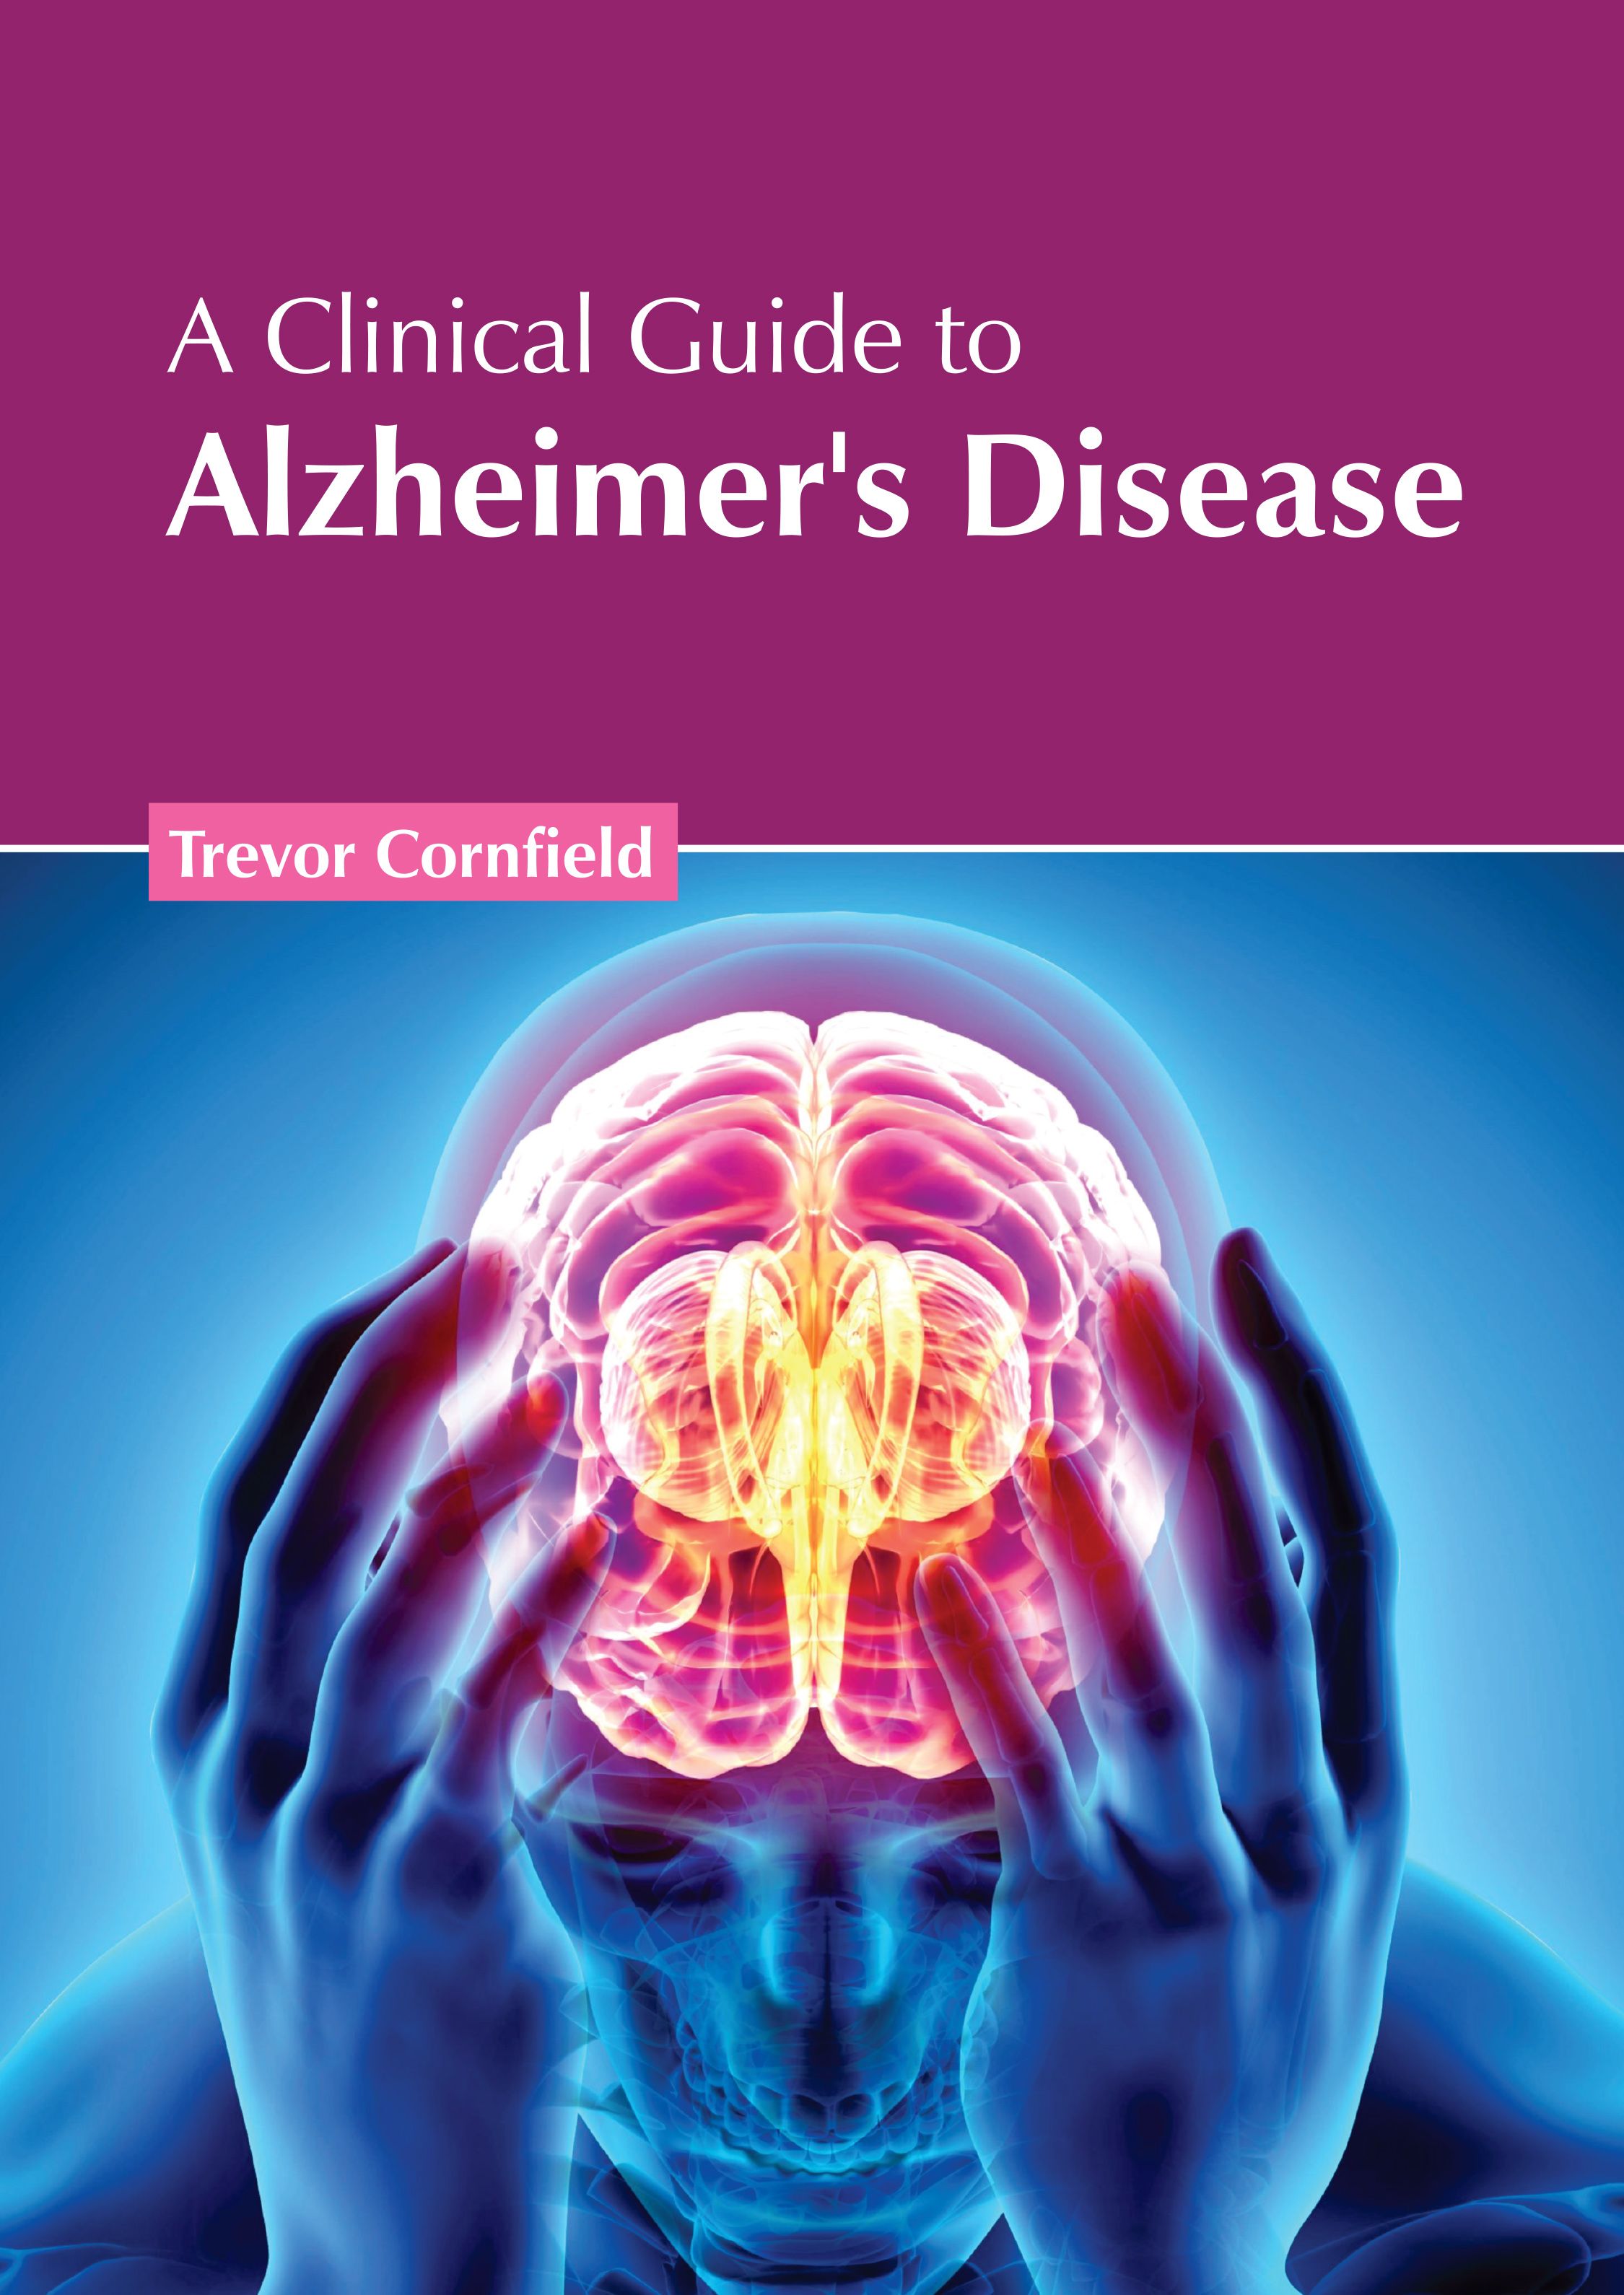 A CLINICAL GUIDE TO ALZHEIMER'S DISEASE